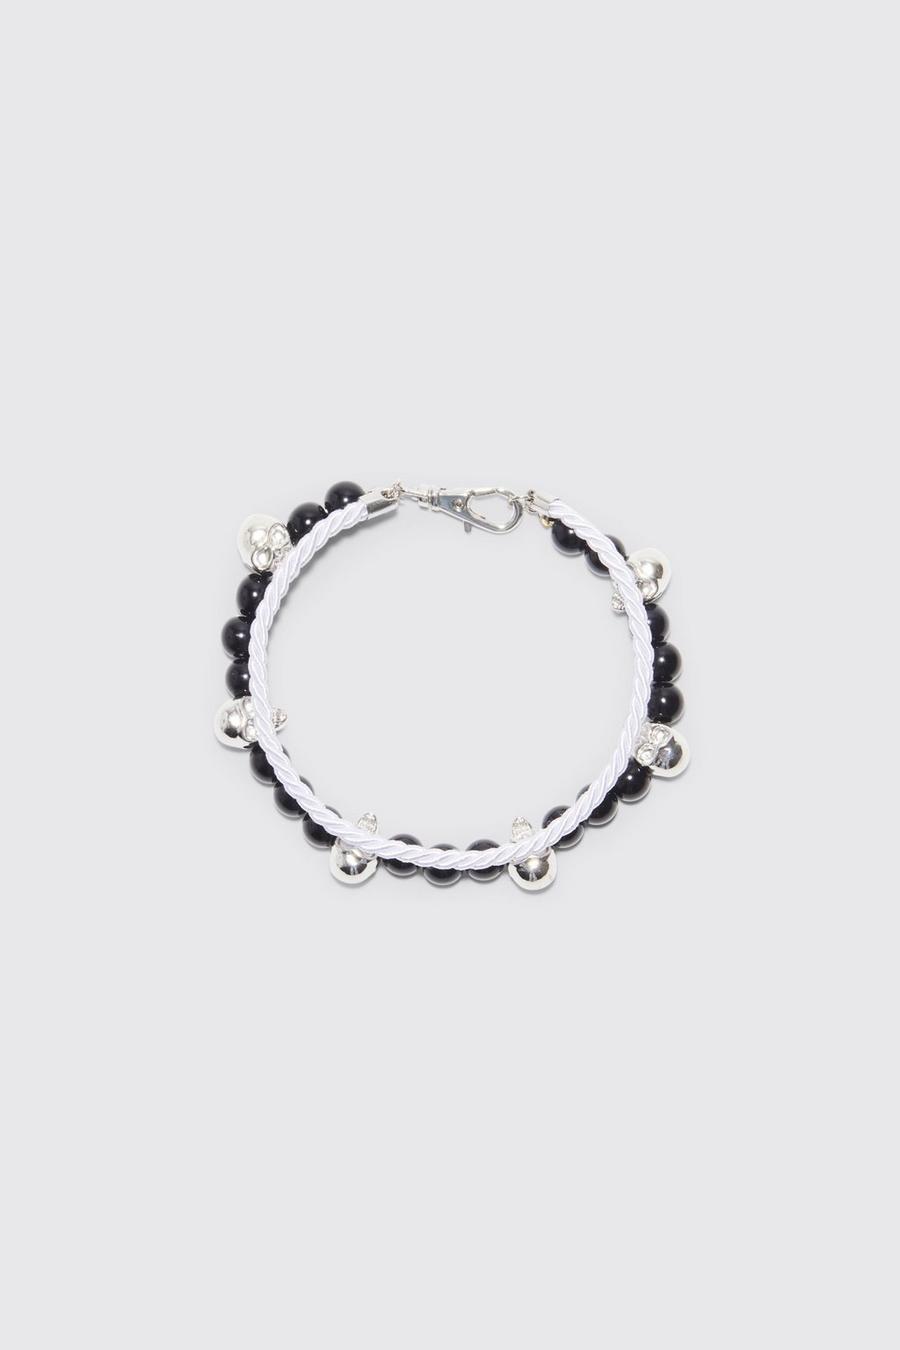 Skull Bead And Chain Bracelets, Silver